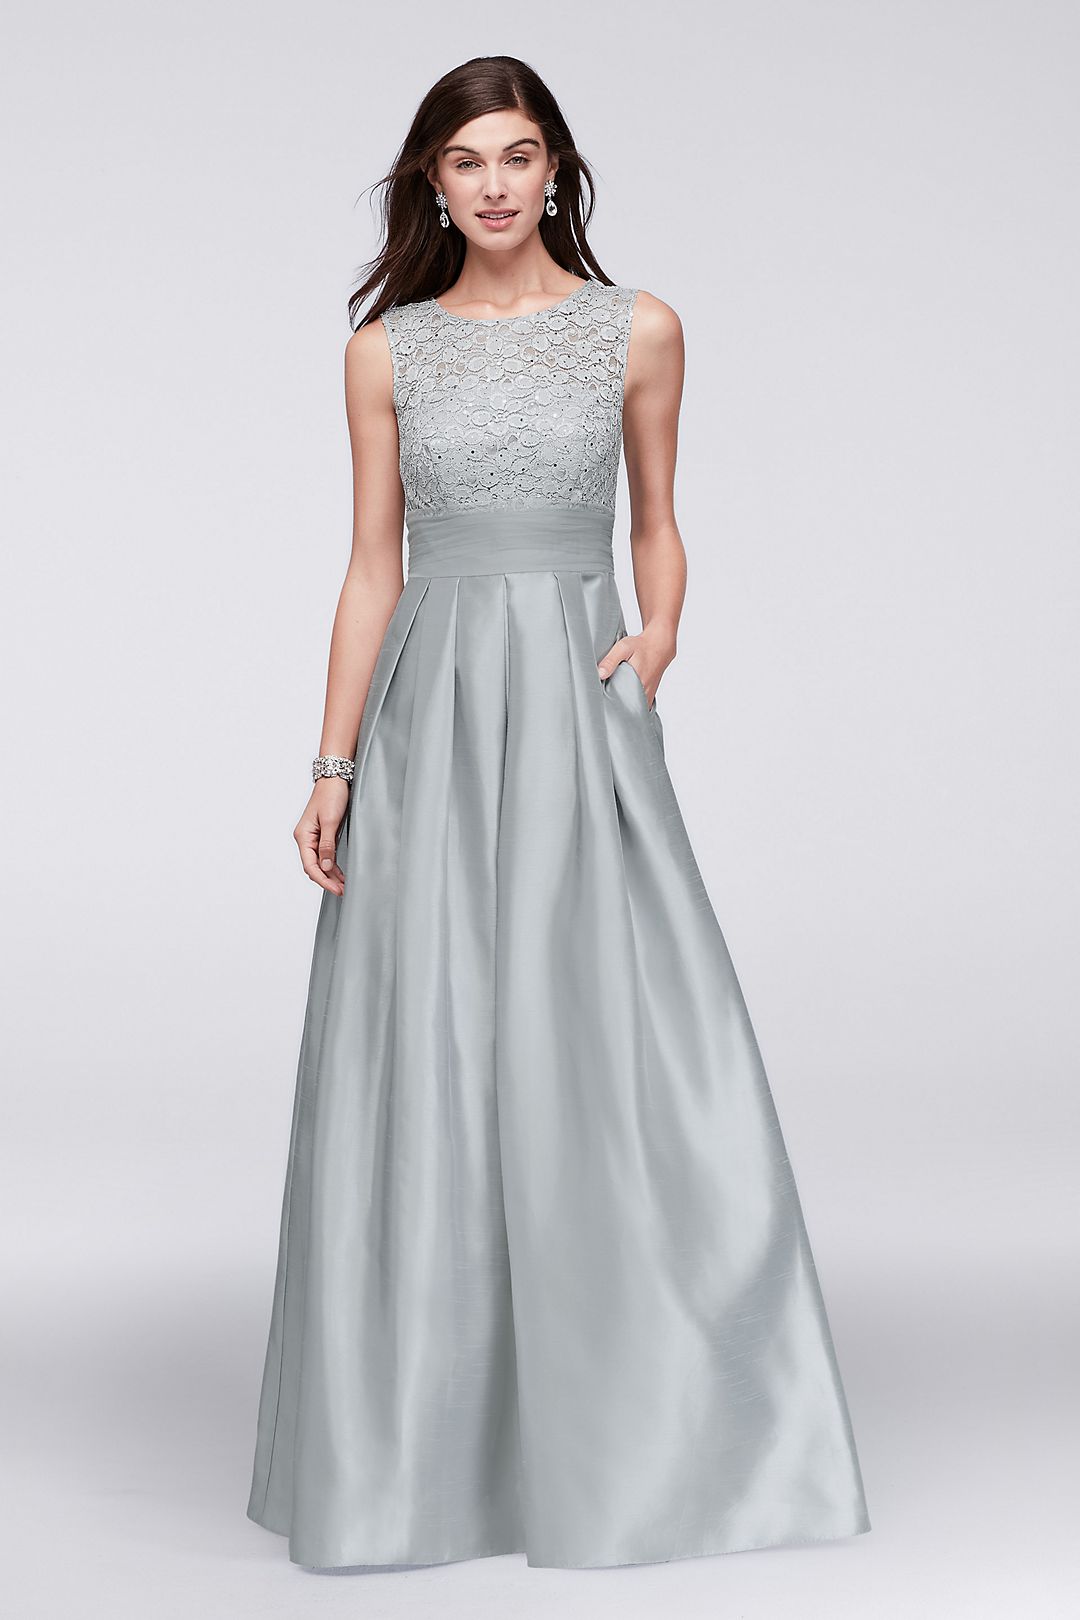 Lace and Satin Sleeveless Ball Gown Image 4